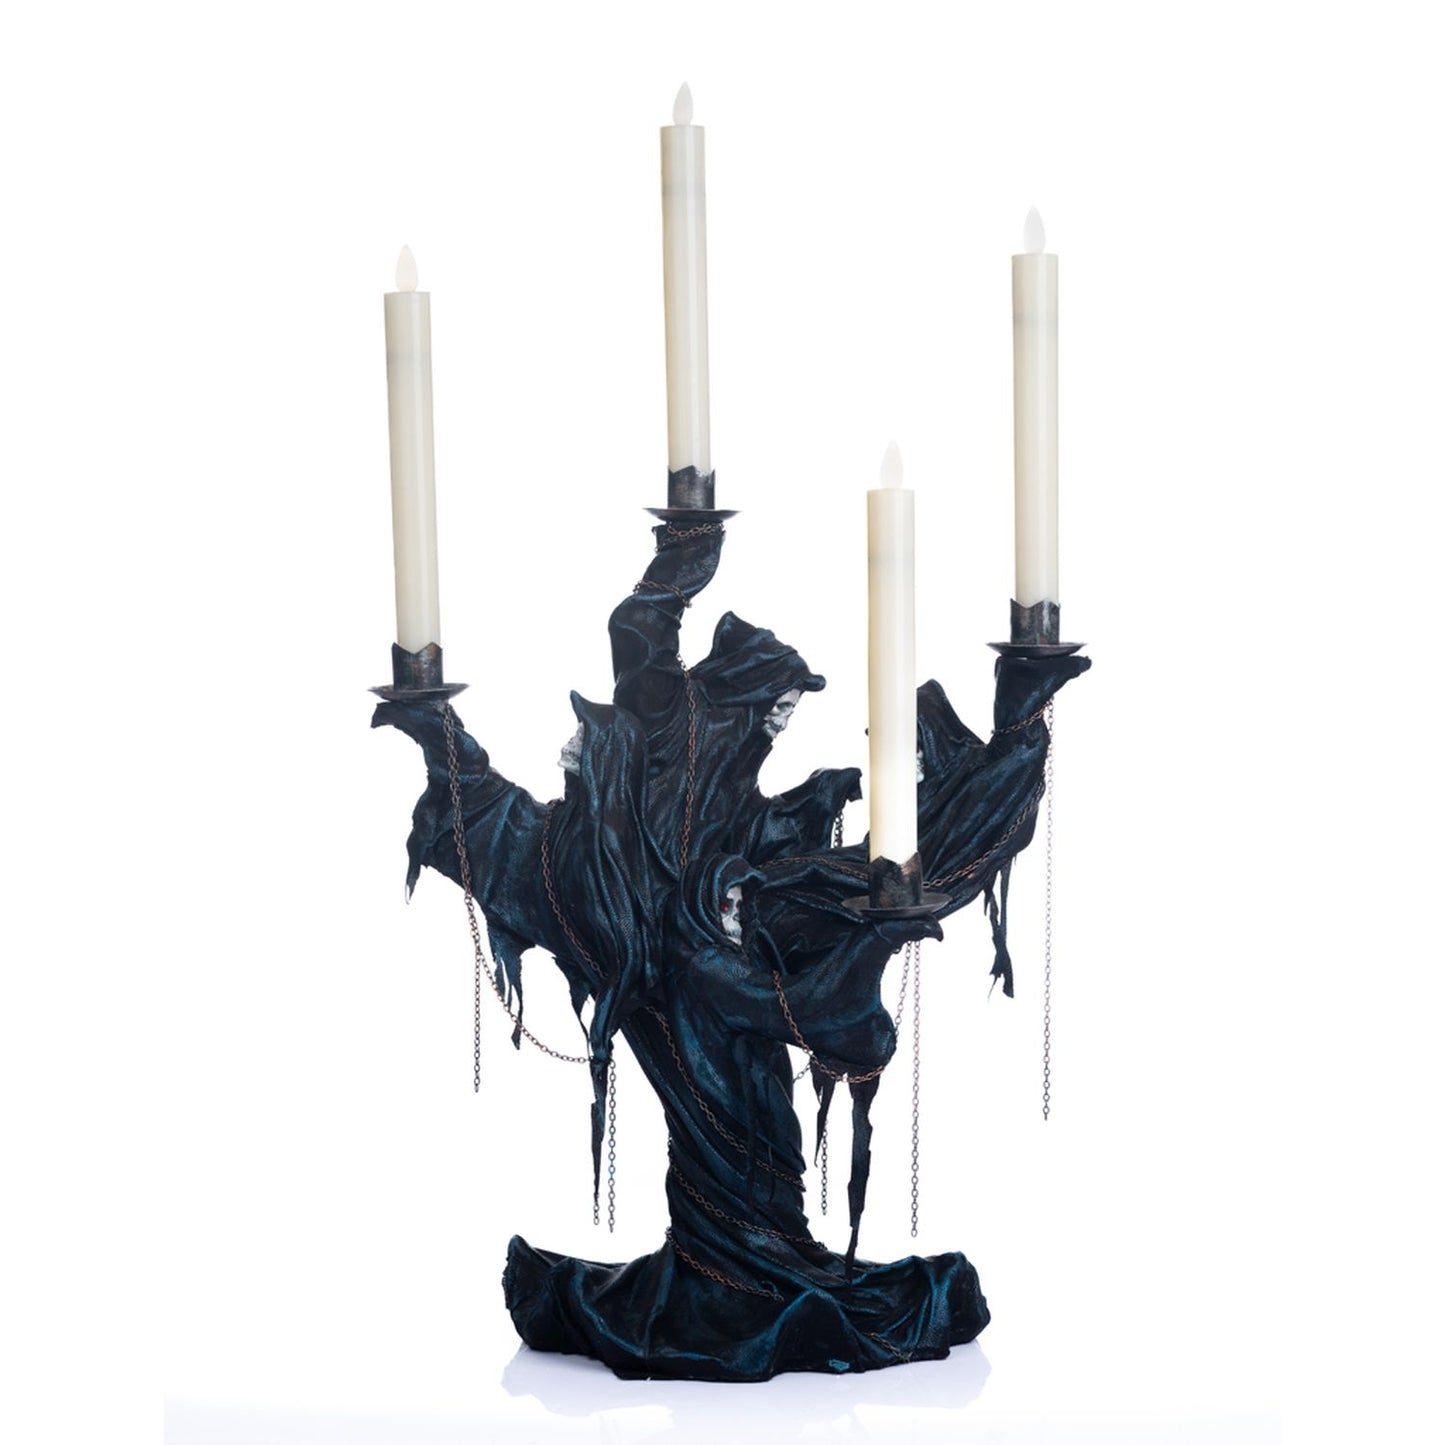 Katherine's Collection 2023 Seers and Takers 17" Thanatos Candelabra, Black Resin